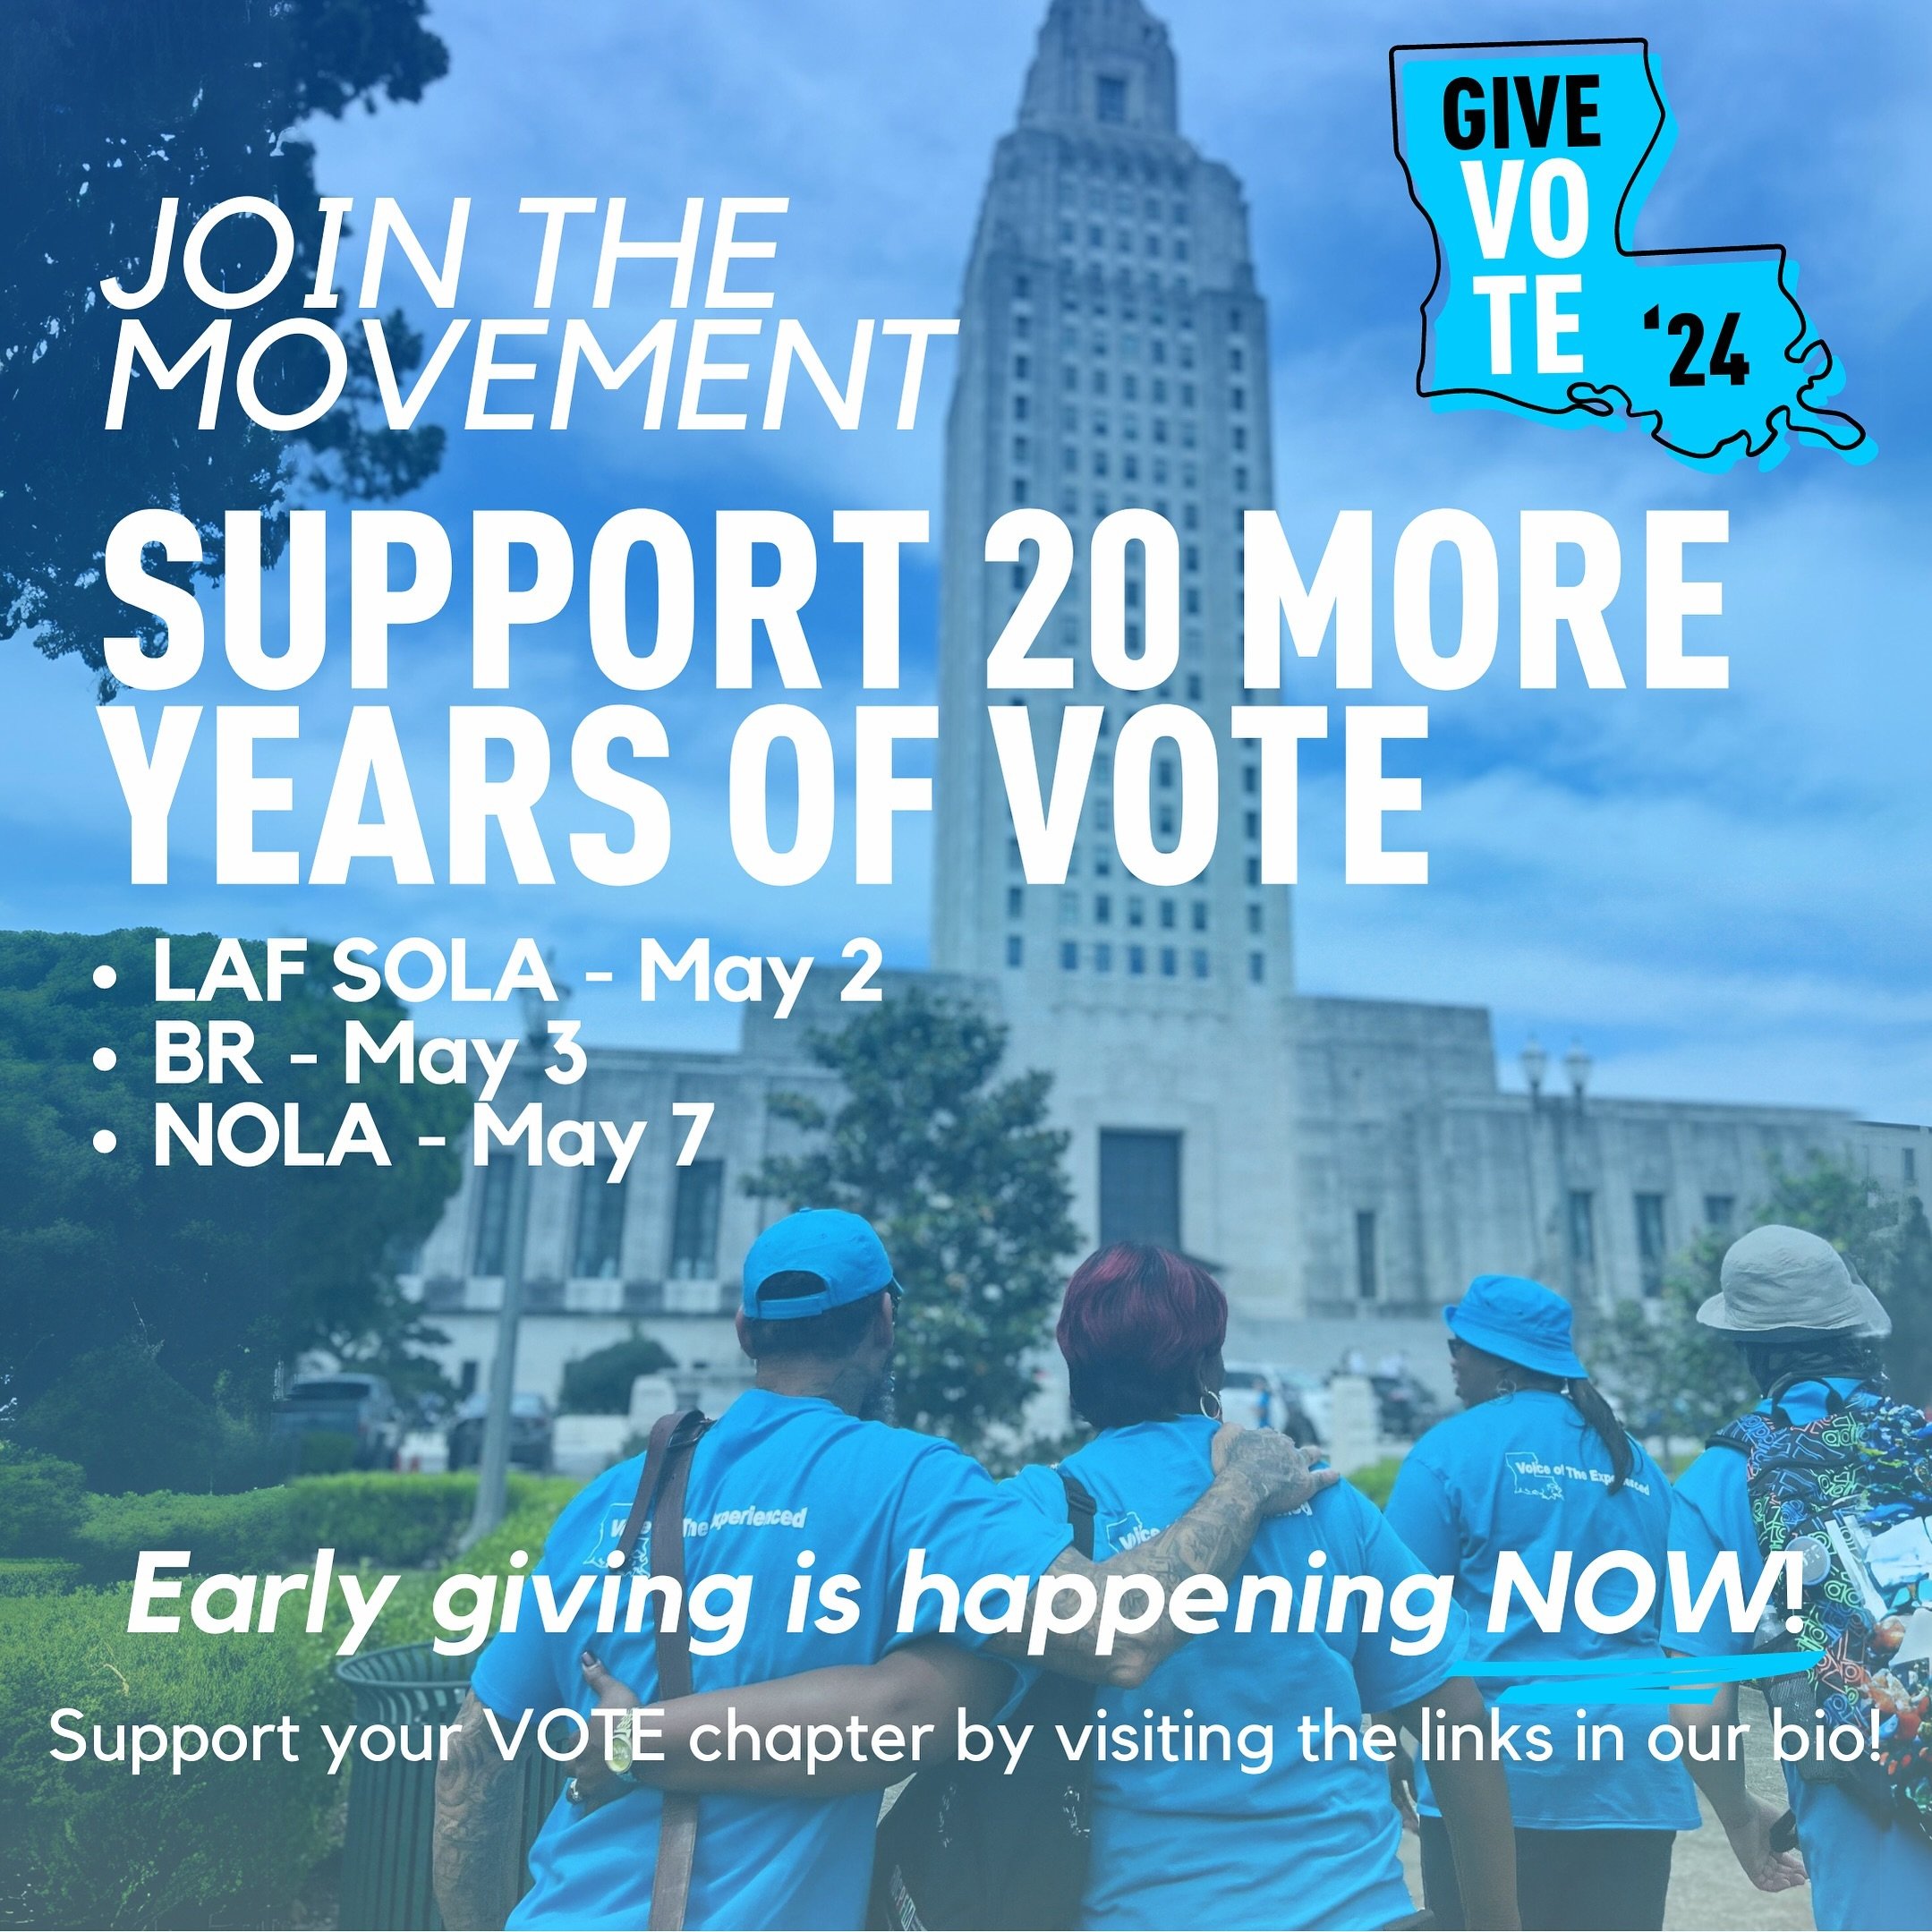 This week we kickoff our 2nd Annual Chapter Giving Campaign that celebrates the camaraderie of our Chapters&rsquo; communities and big wins at the local level. Over the years, VOTE&rsquo;s people power expanded alongside the founding of the Baton Rou